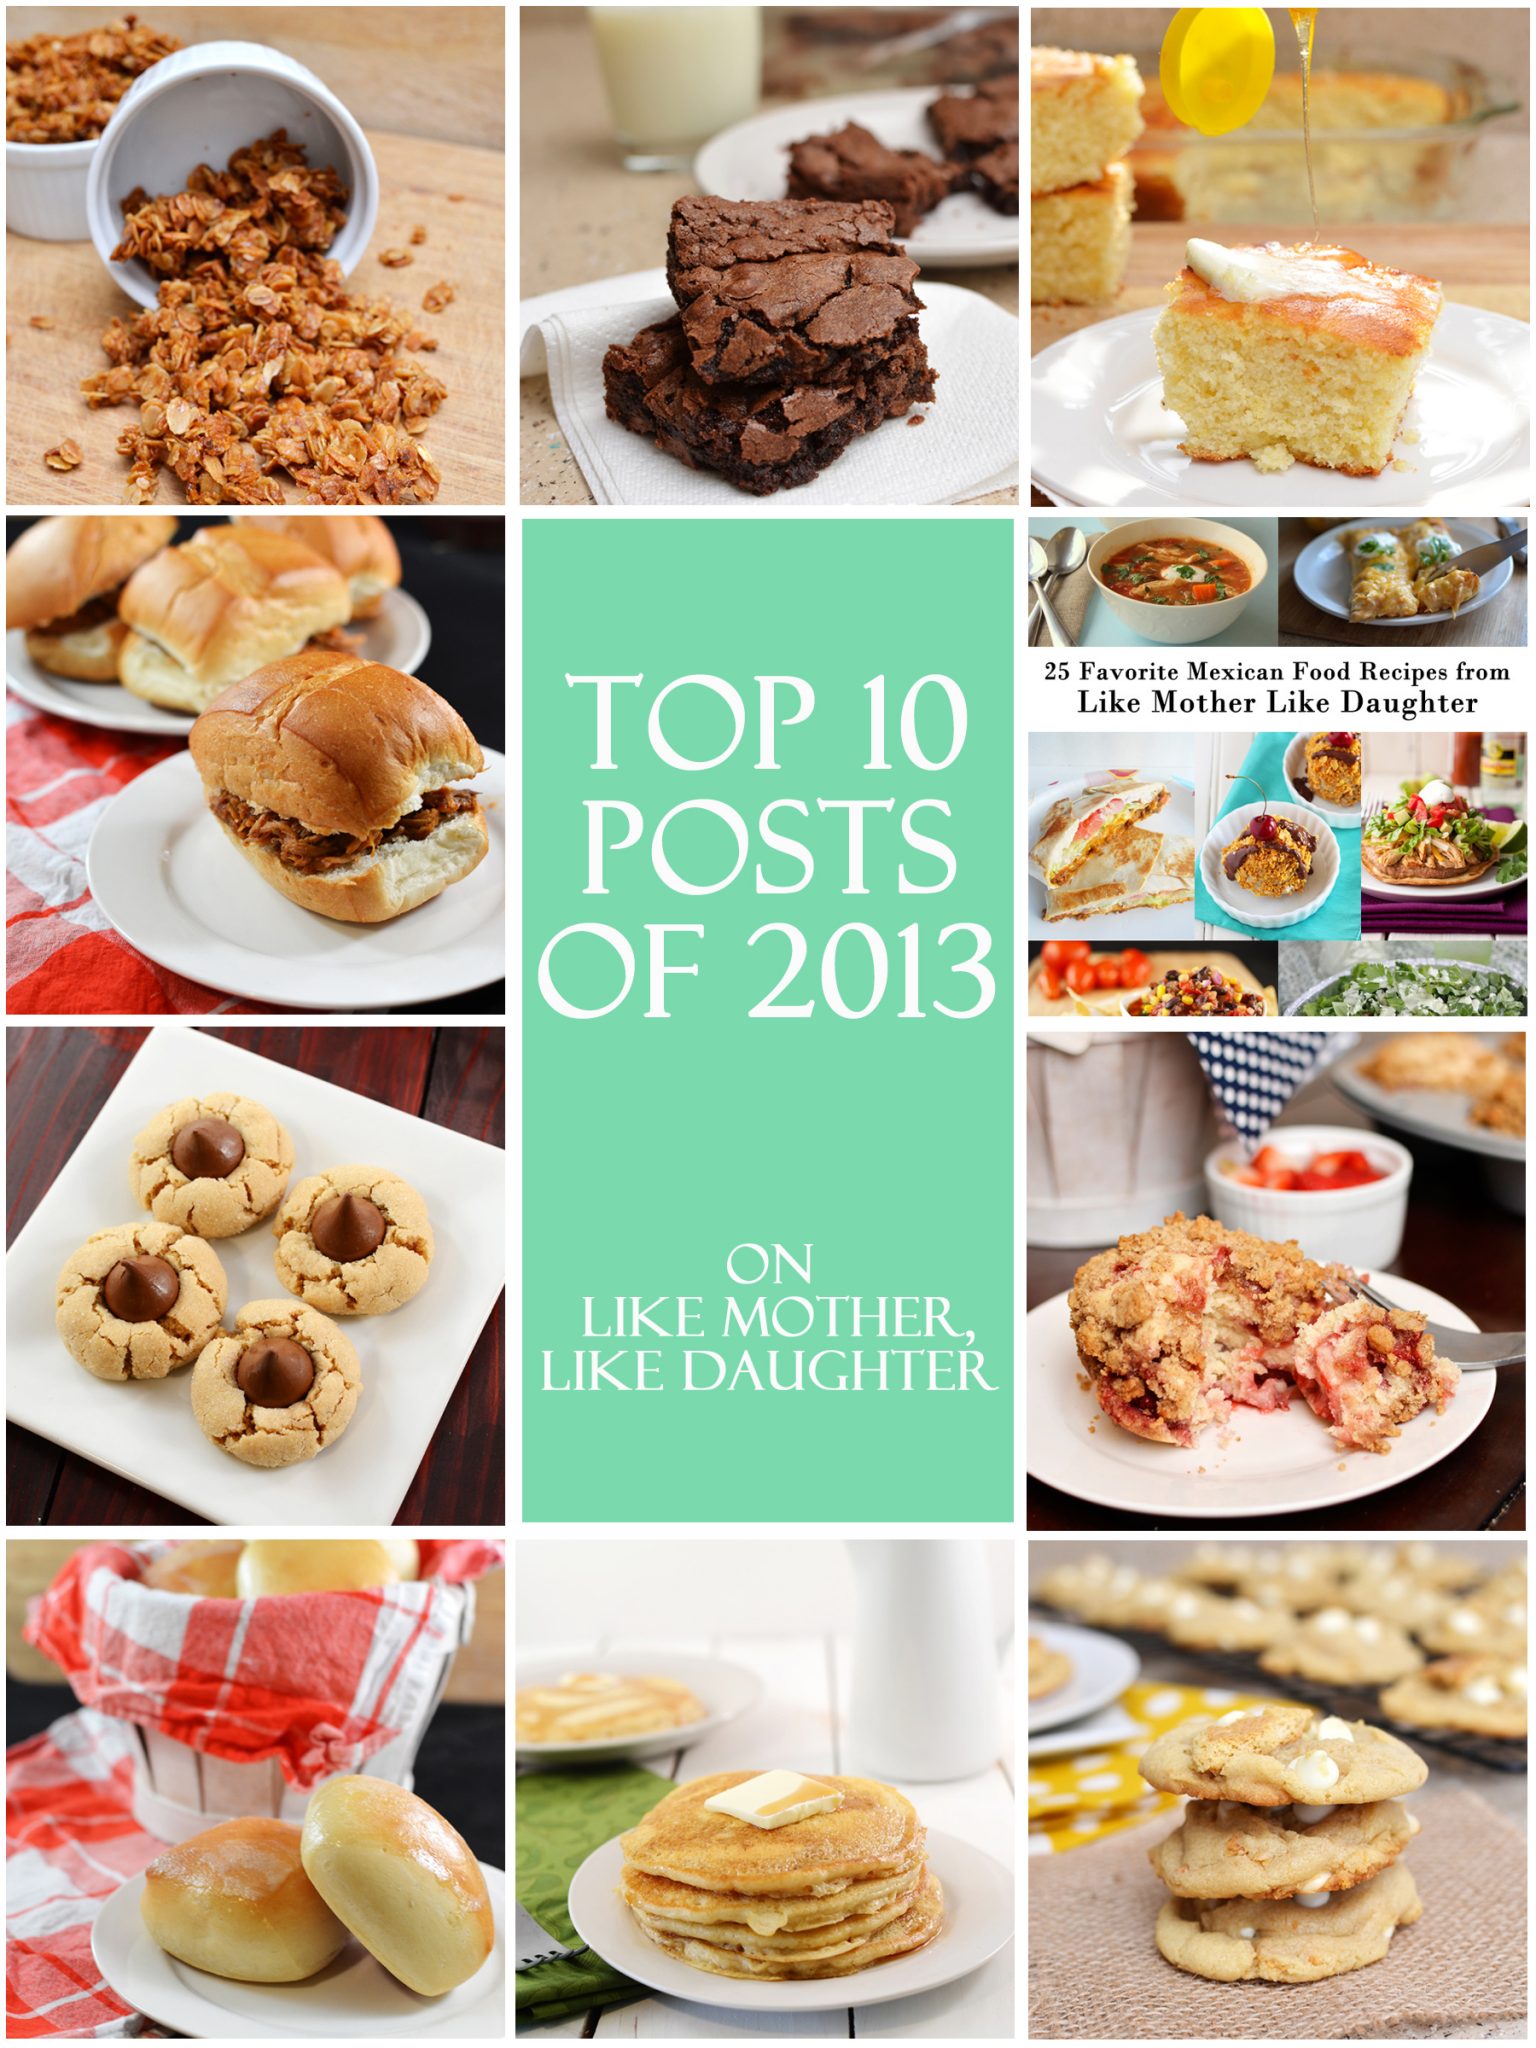 Title card collage for top 10 posts of 2013 on like mother like daughter.